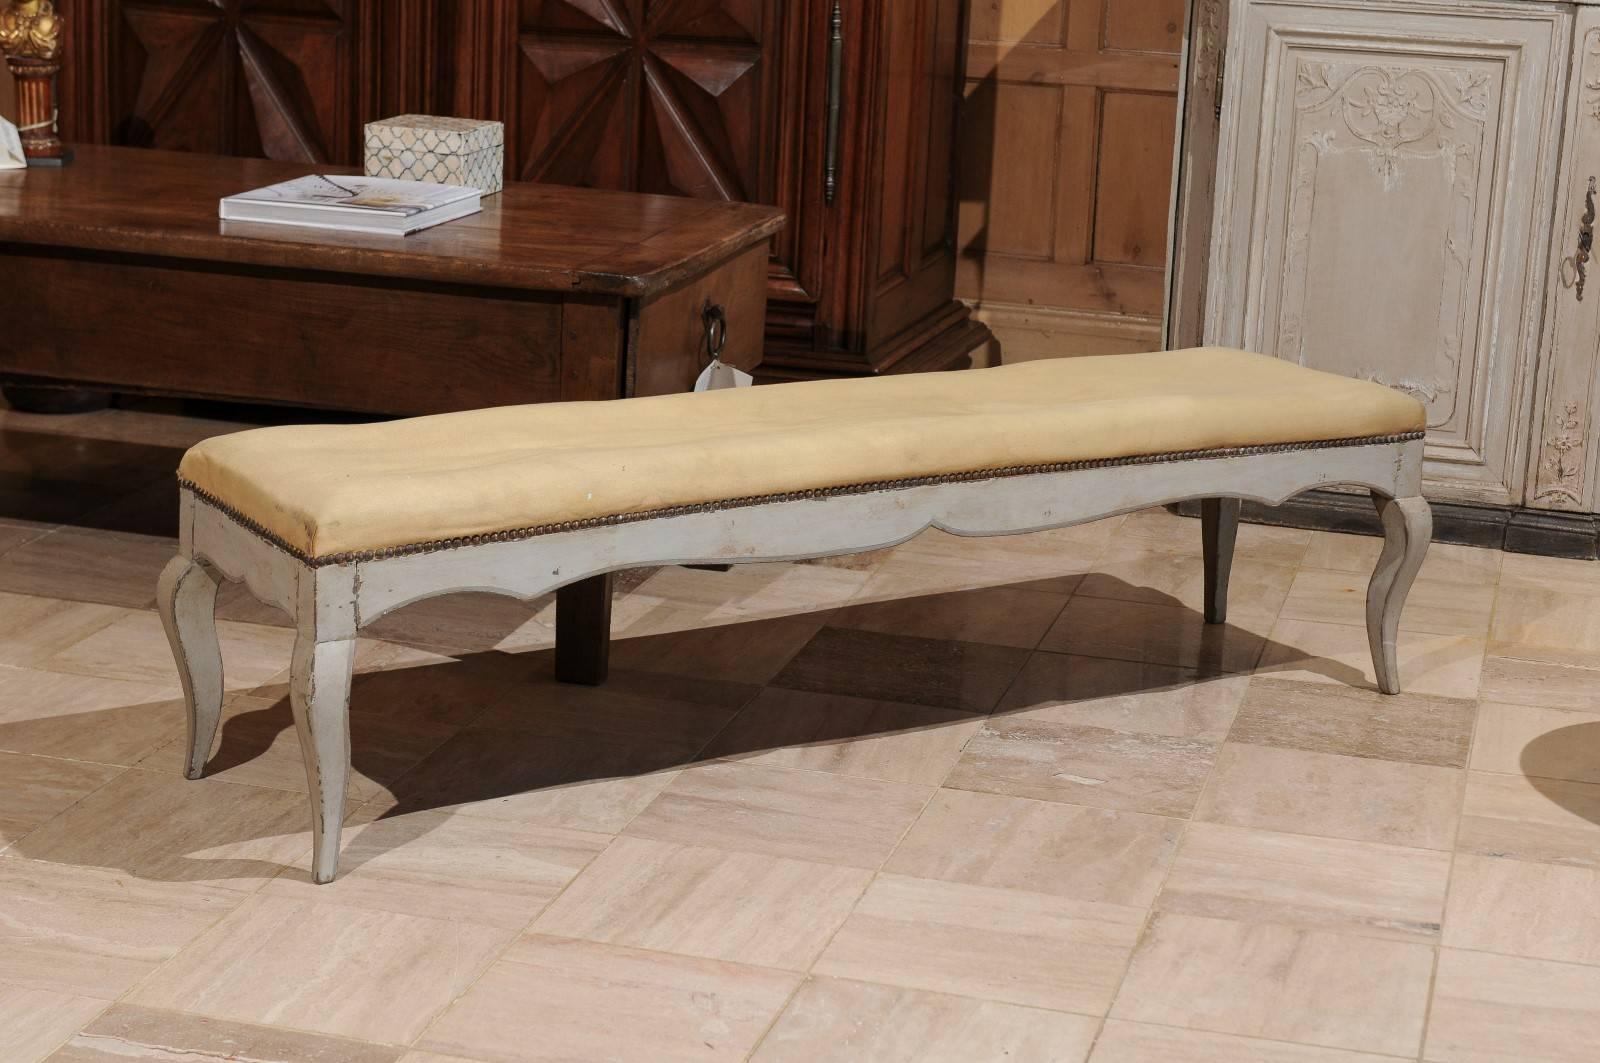 Long benches are difficult to find. This one has cabriole legs and a pretty serpentine apron. The frame has a casual look with some distressing. The upholstery needs to be replaced.